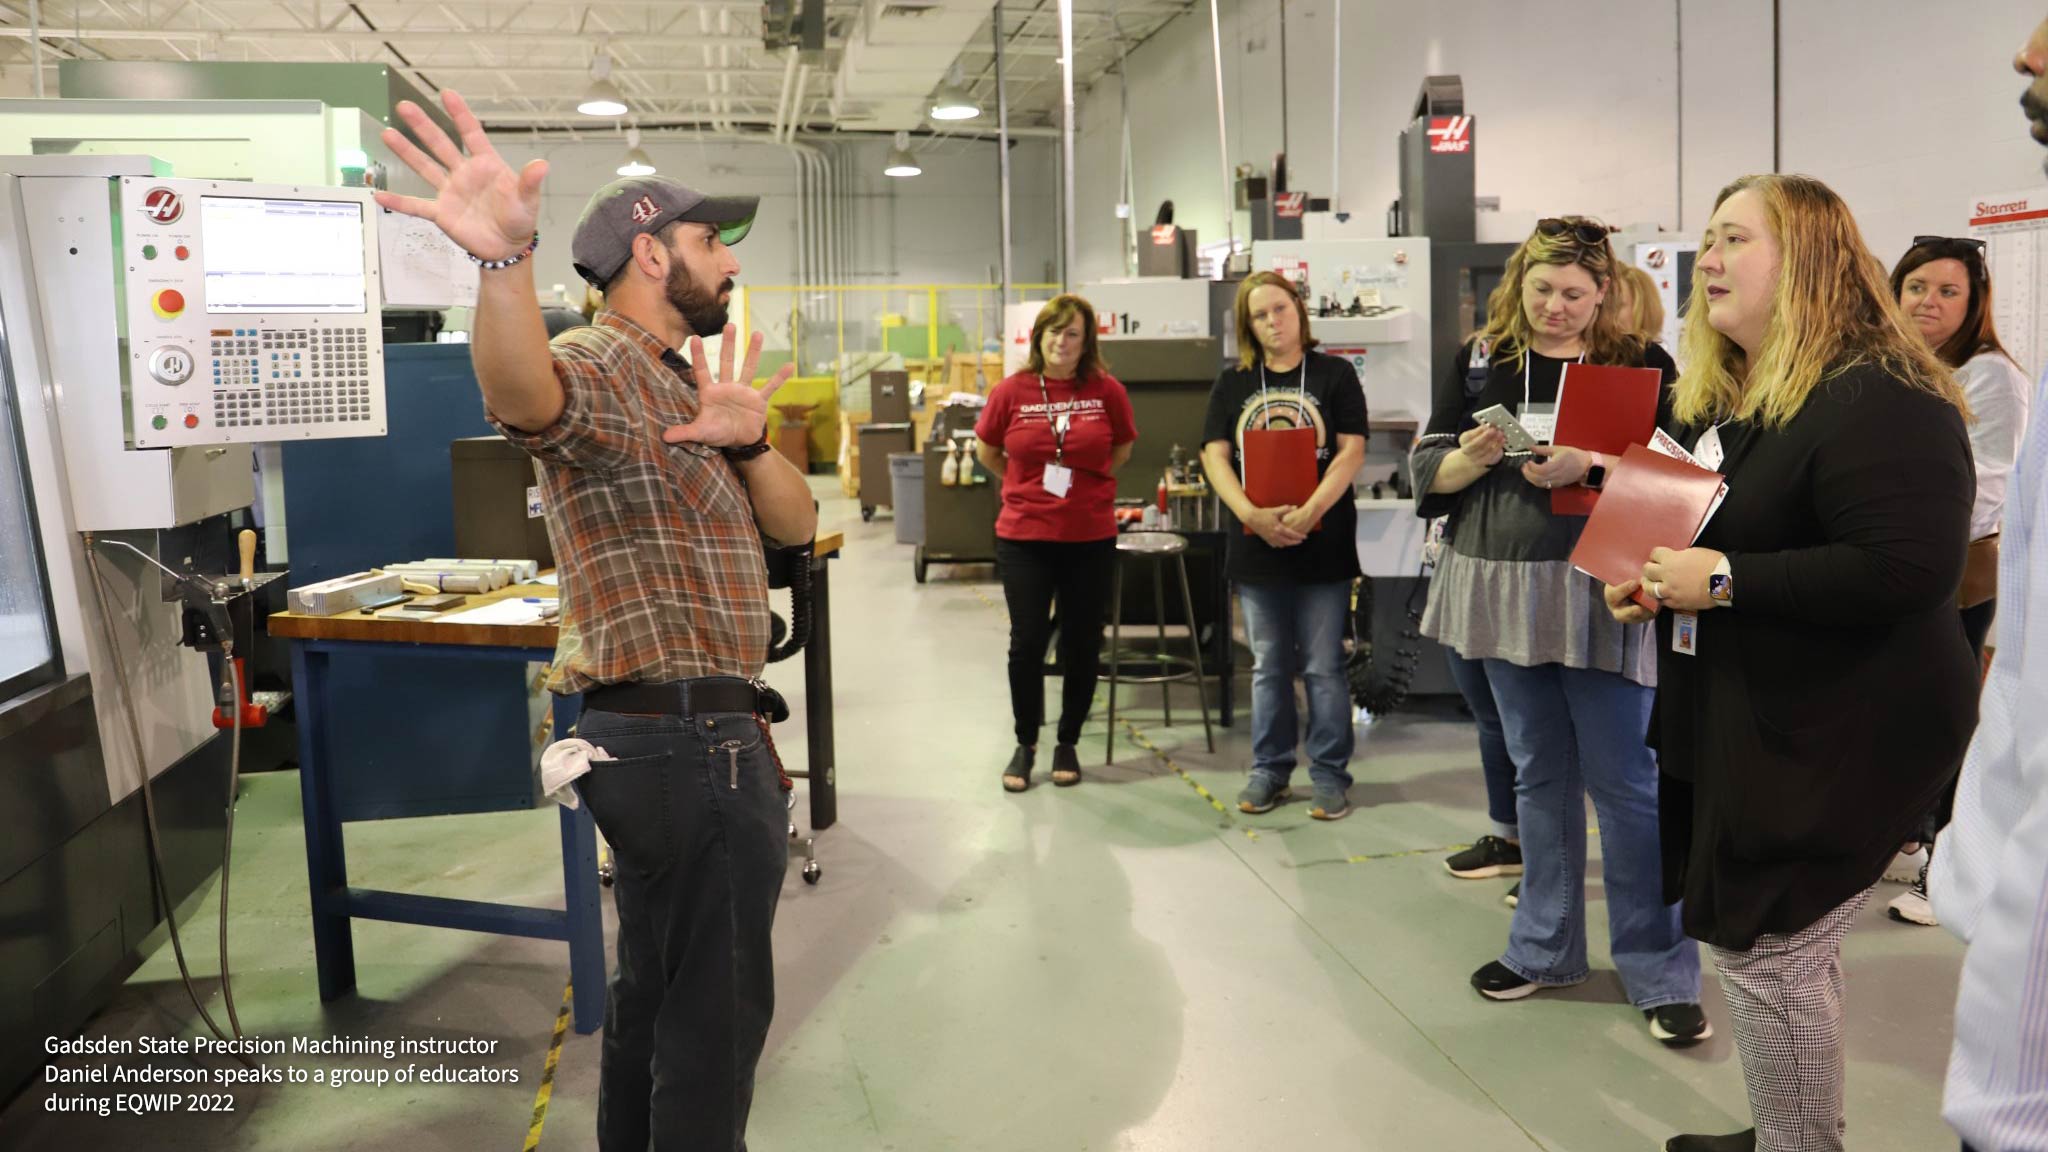 Gadsden State Precision Machining instructor Daniel Anderson speaks to a group of educators during EQWIP 2022